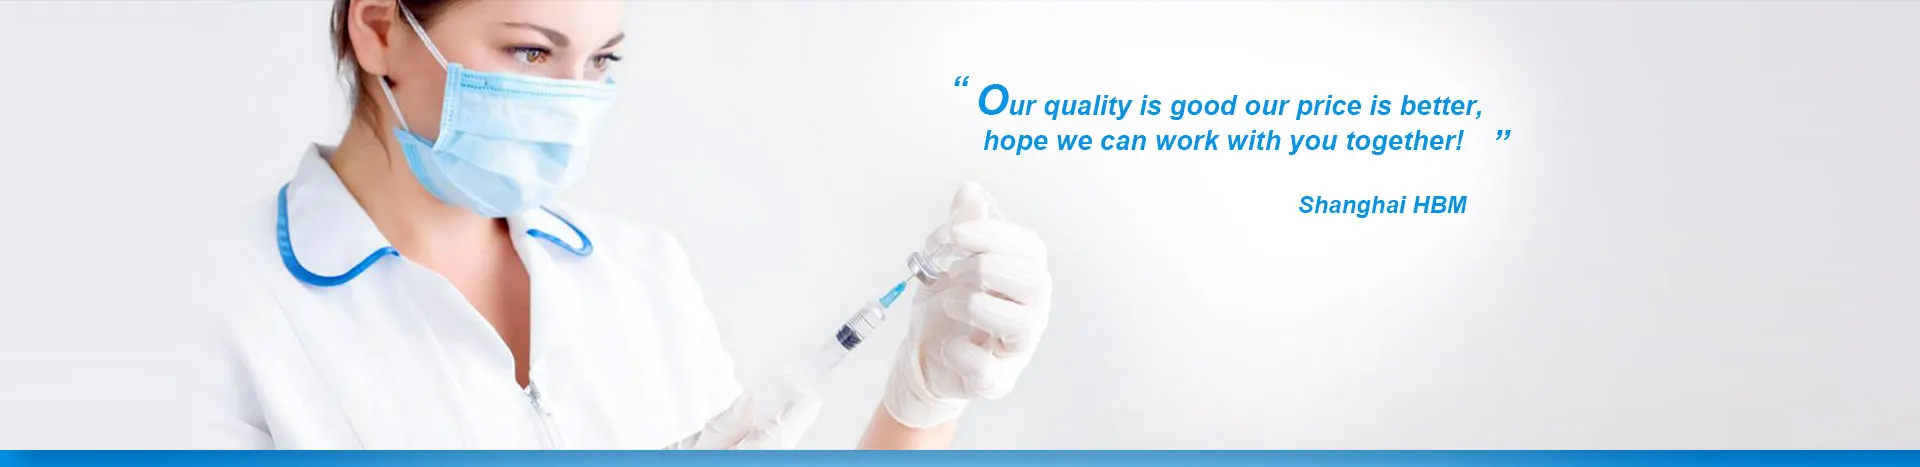 Our quality is good our price is better,  hope we can work with you together!_shanghai hbm